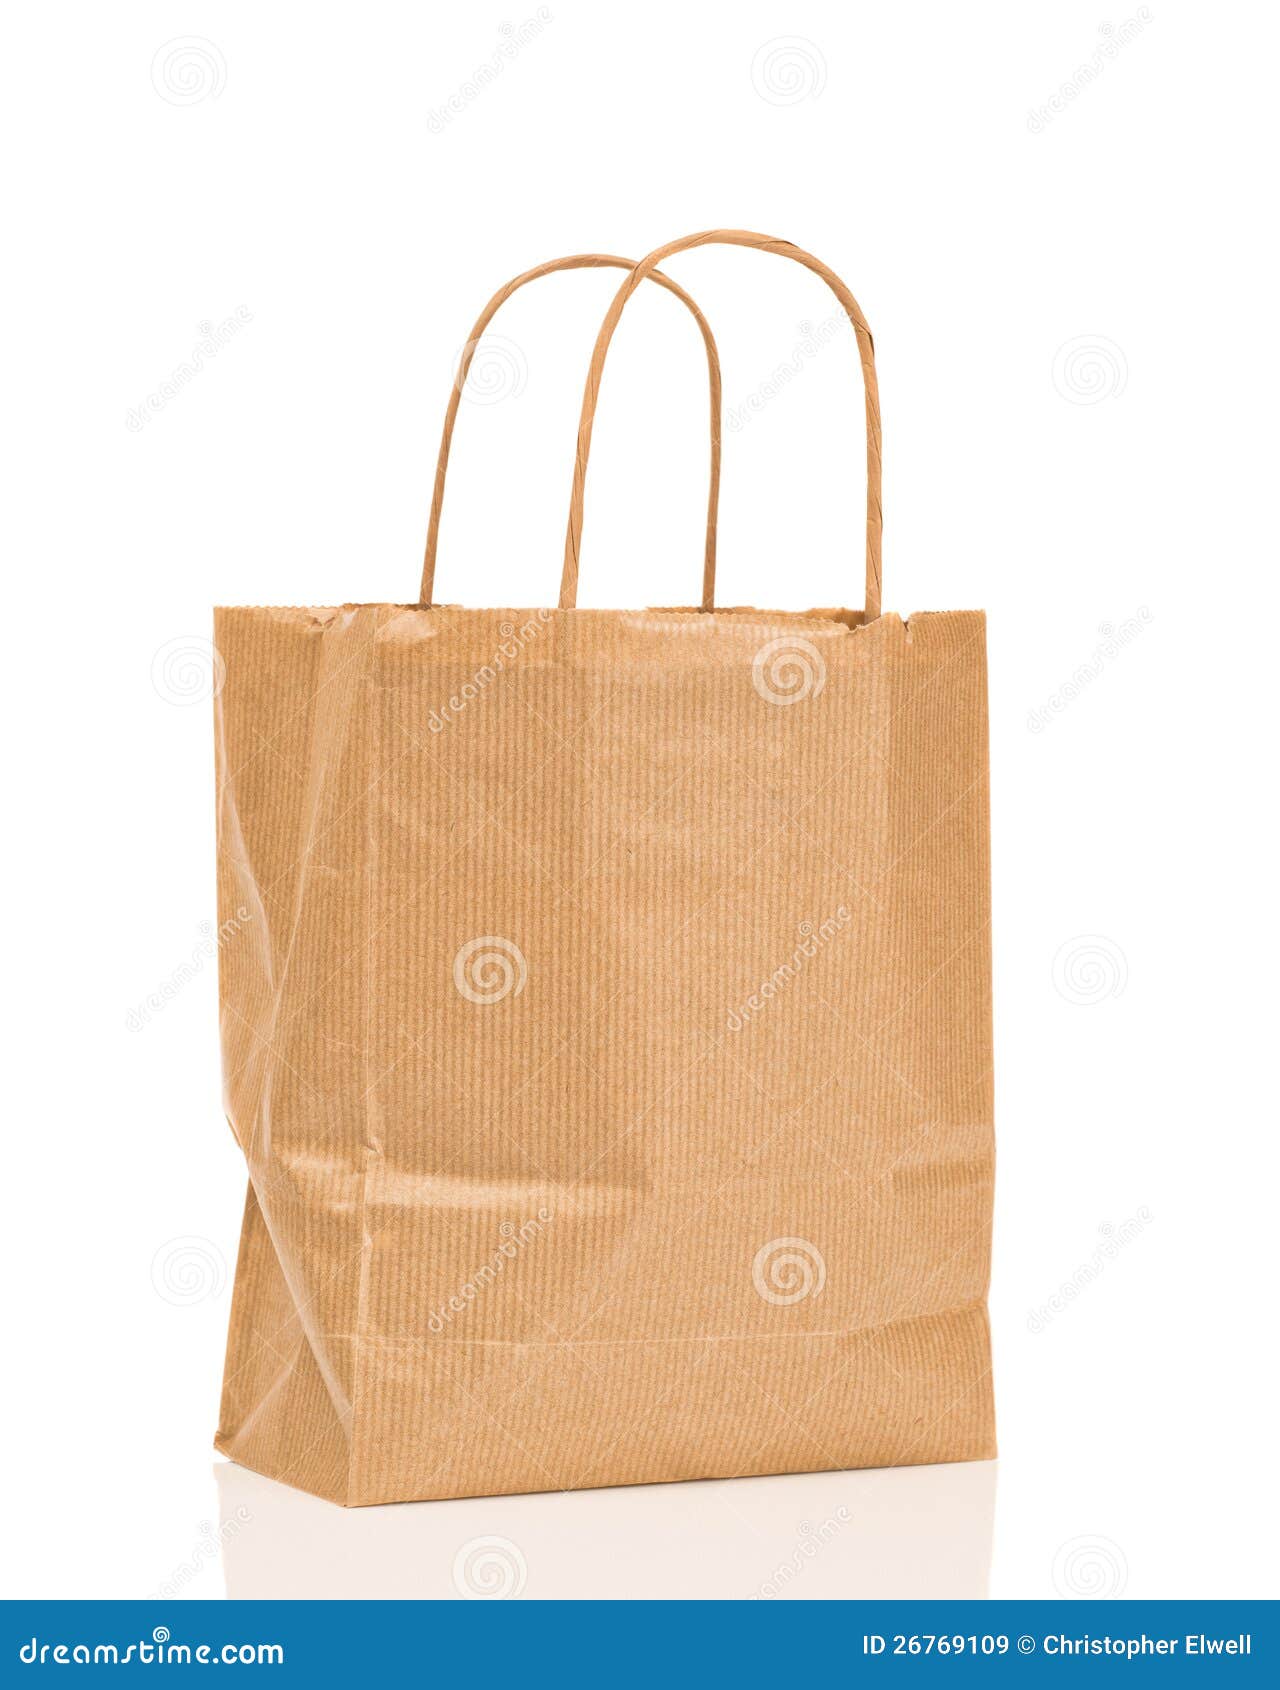 Brown Paper Bag stock image. Image of carrier, handles - 26769109